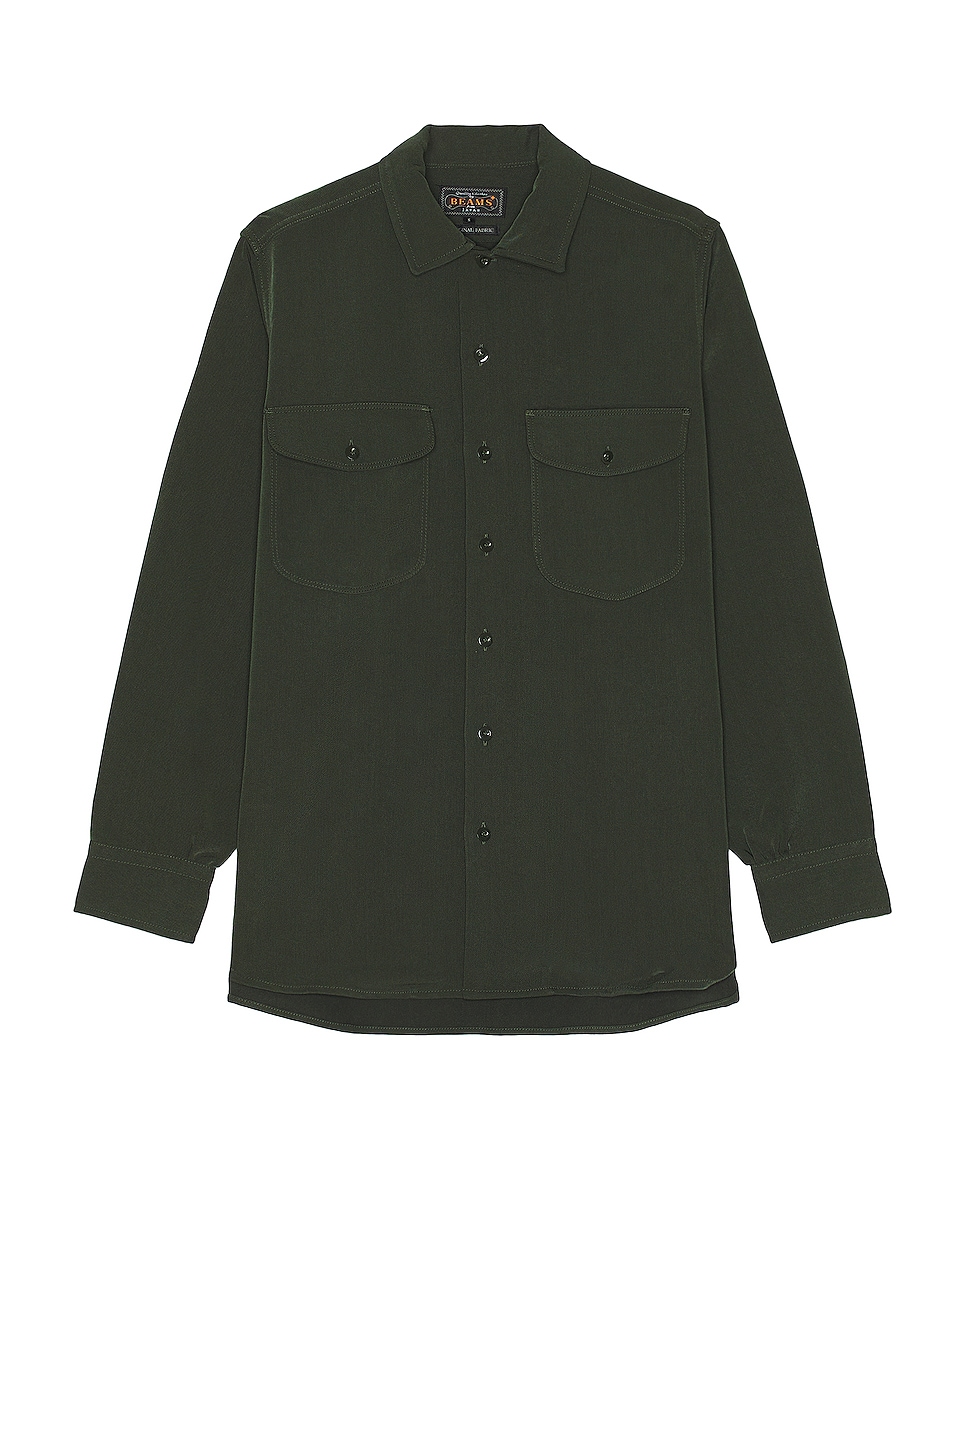 Image 1 of Beams Plus Work Classic Fit Pe Twill Shirt in Green